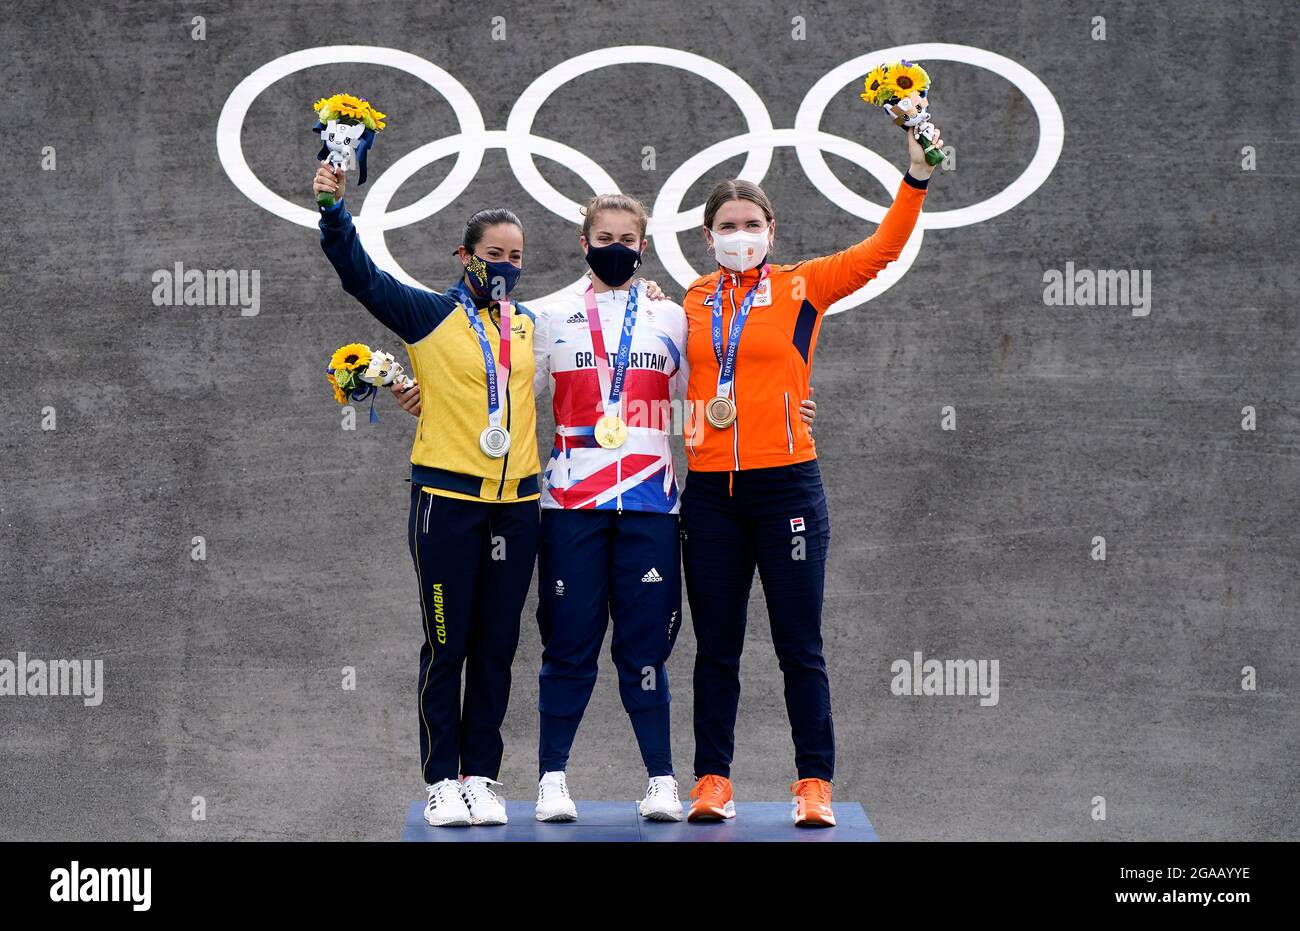 Great Britain's Bethany Shriever collects her Gold medal alongside Colombia’s Mariana Pajon (Silver) and Netherland’s Merel Smulders (Bronze) for the Cycling BMX Racing at the Ariake Urban Sports Park on the seventh day of the Tokyo 2020 Olympic Games in Japan. Picture date: Friday July 30, 2021. Stock Photo